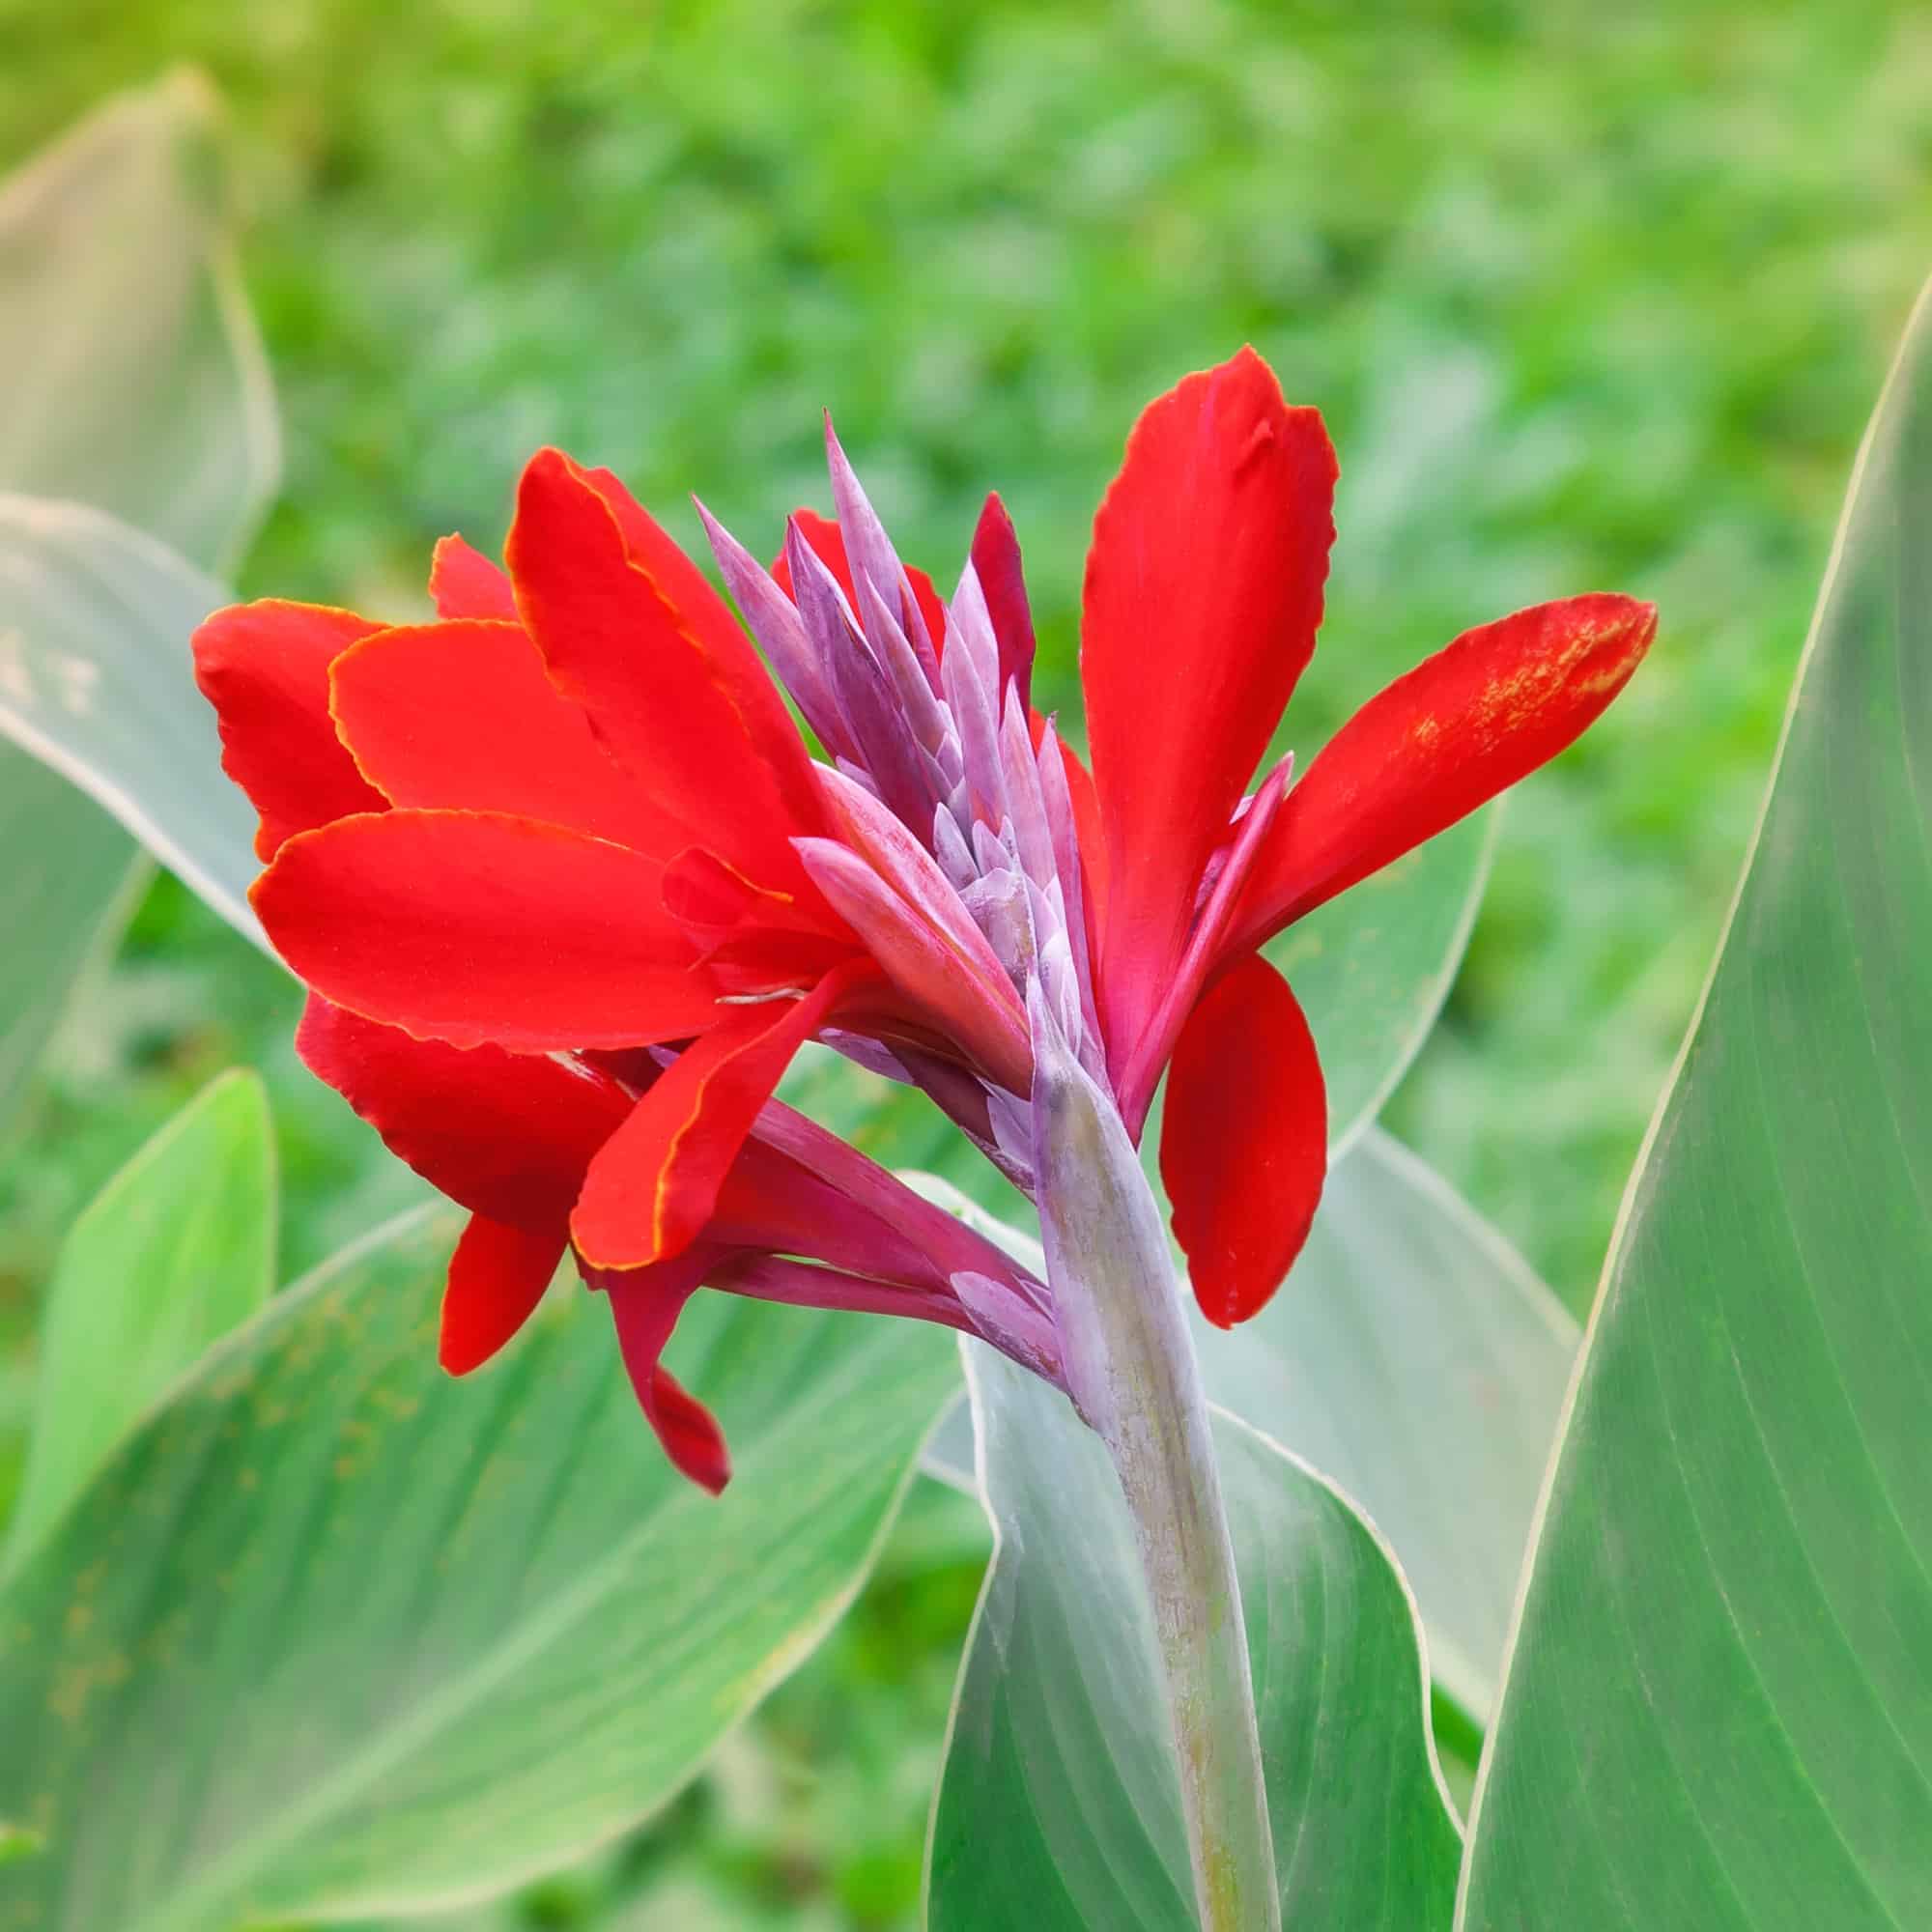 canna flowers that bloom all summer long